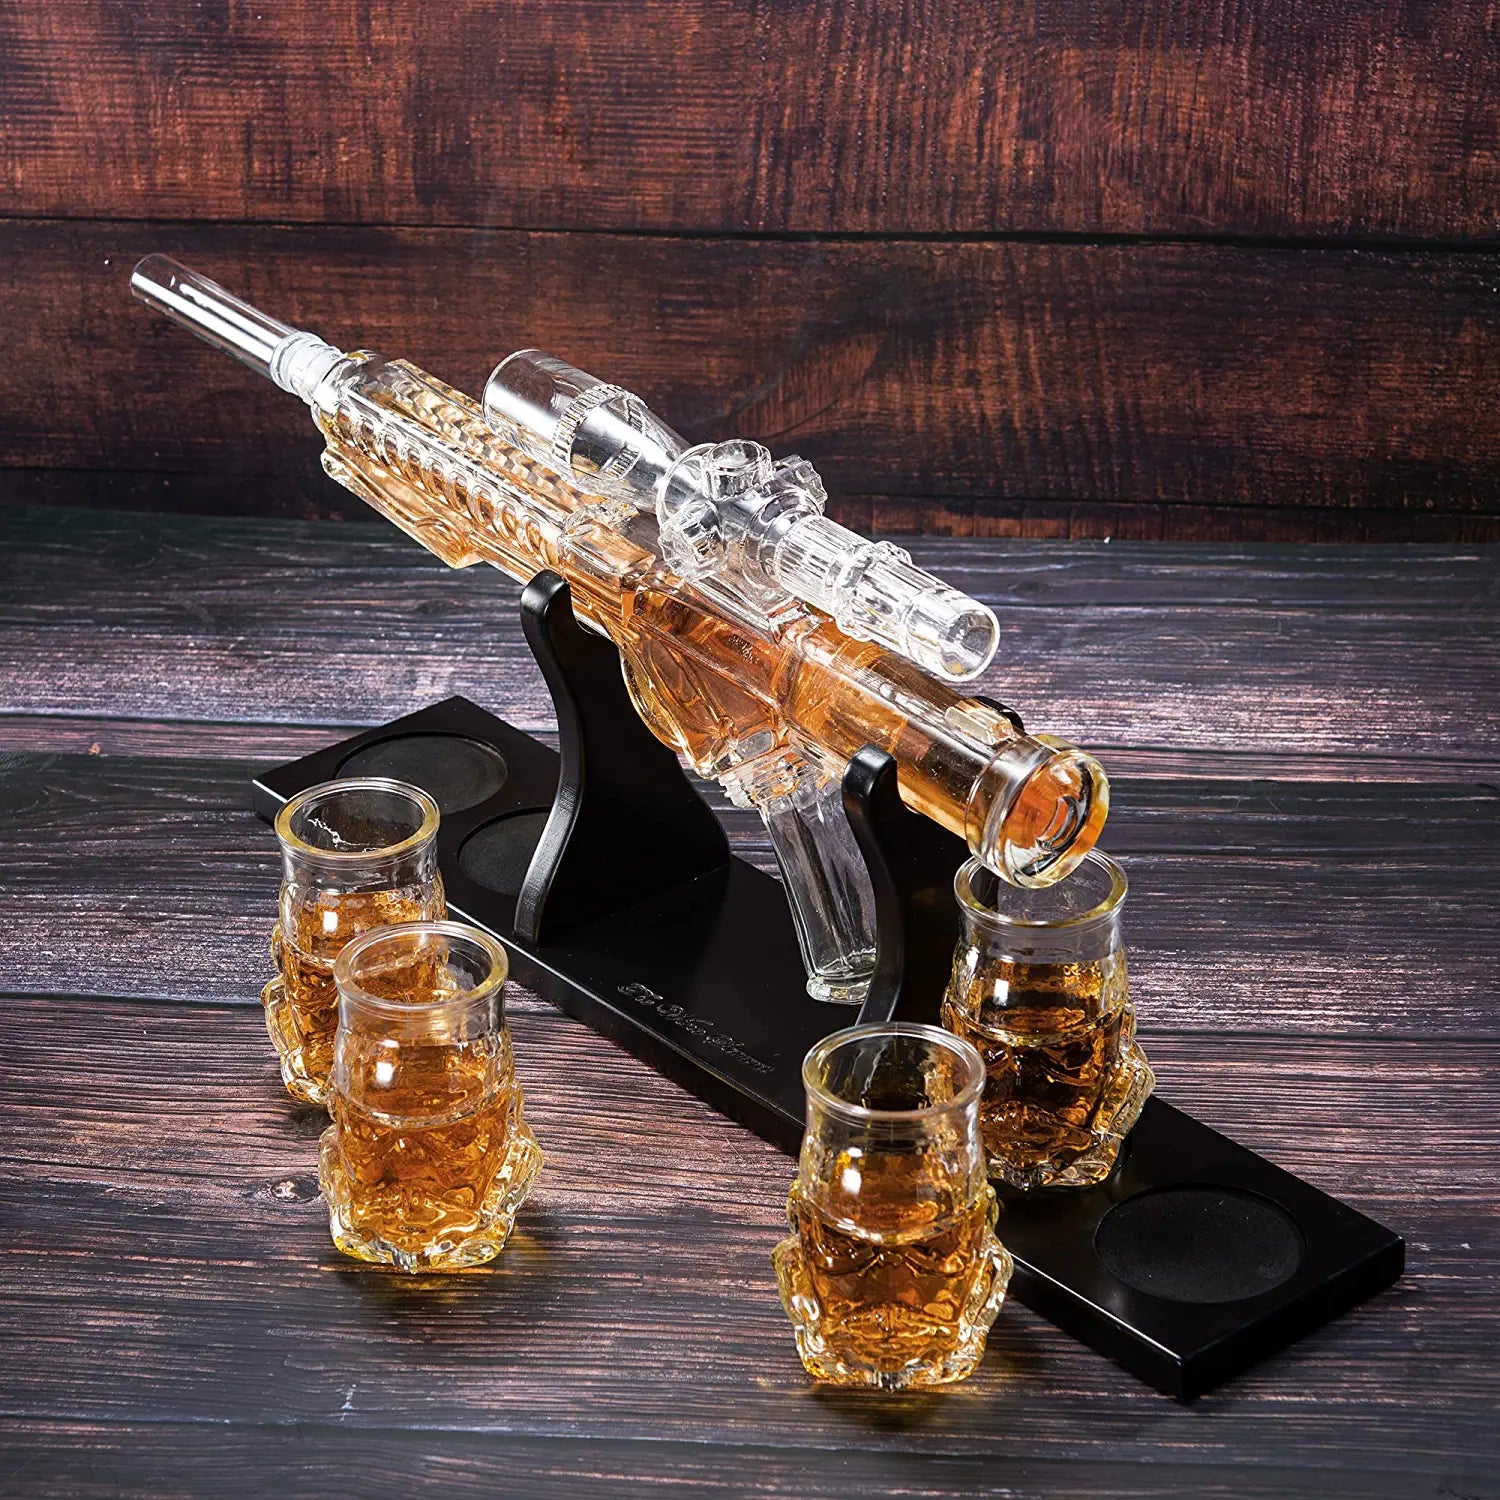 Darth Vader Personalized Gift Whiskey Decanter Set Christmas Gift